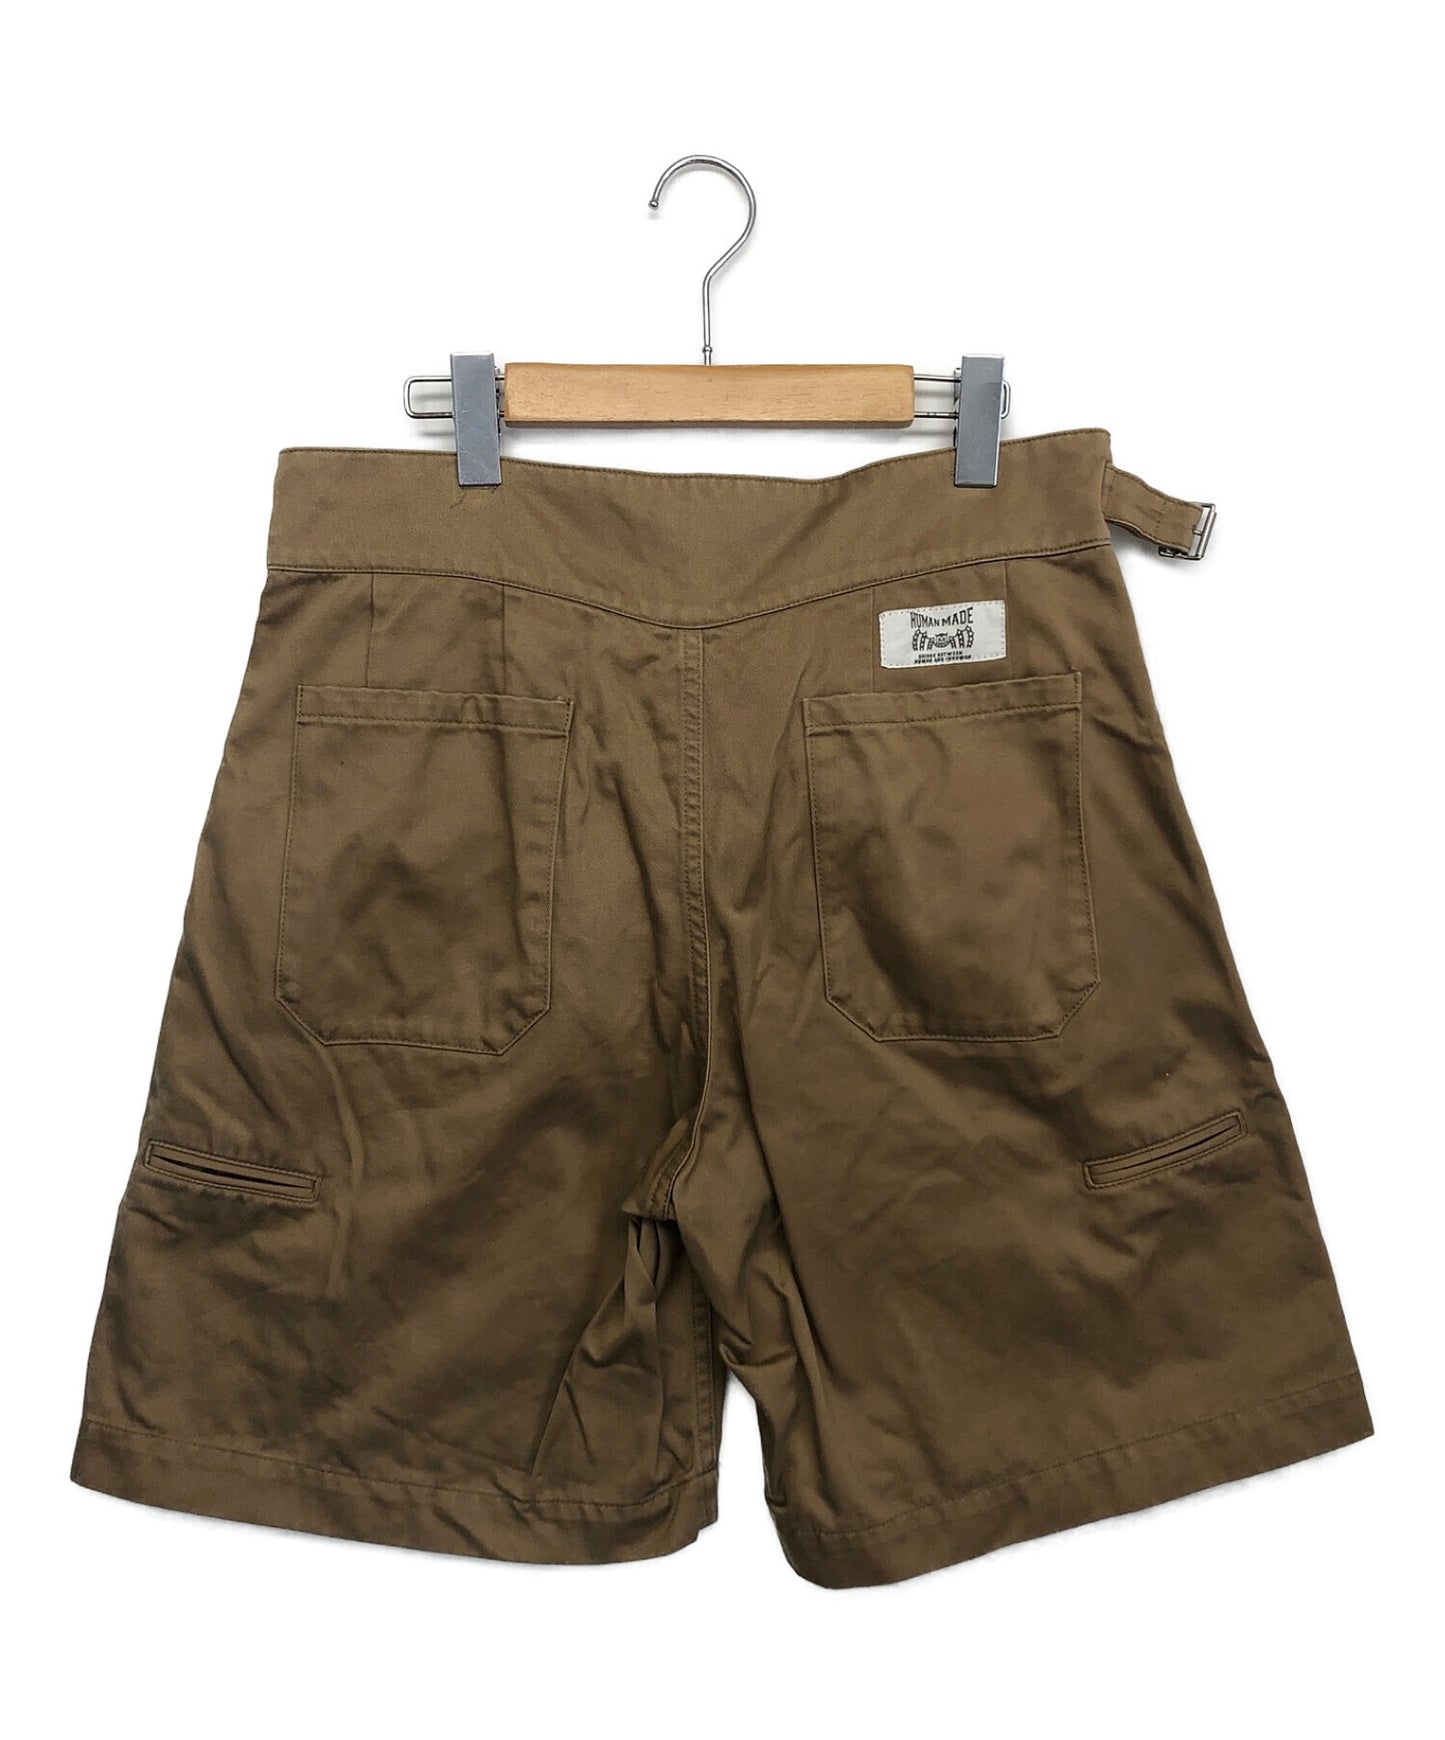 [Pre-owned] HUMAN MADE shorts